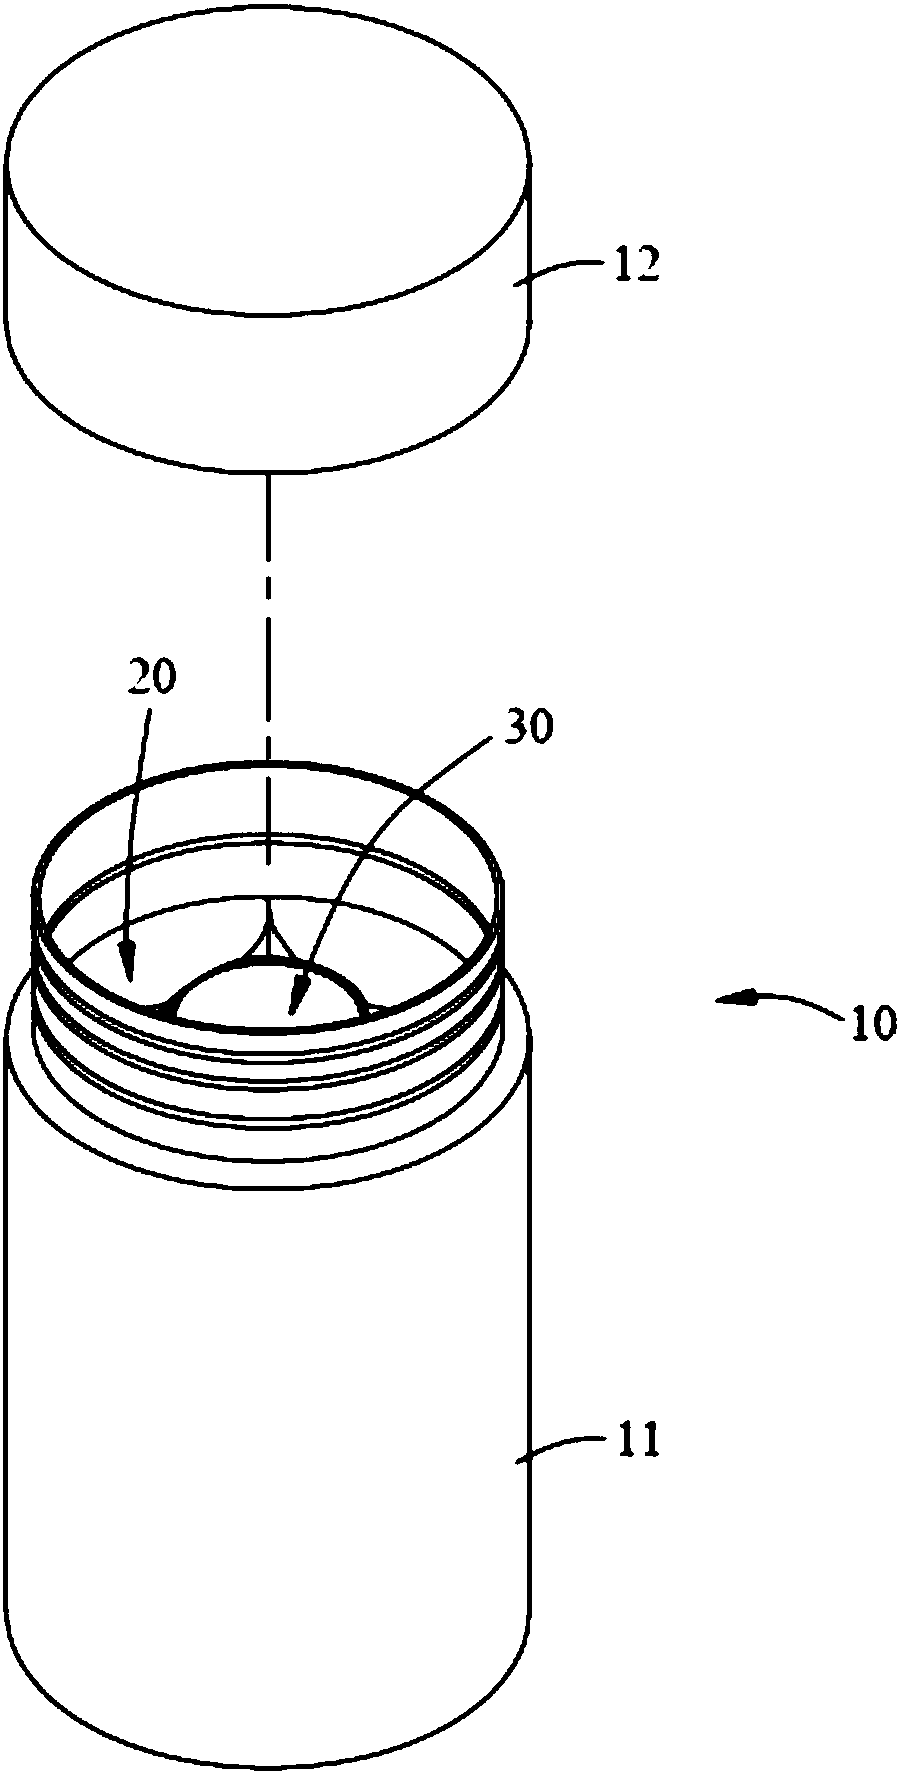 Stem cell-based medicinal product storing and conveying device